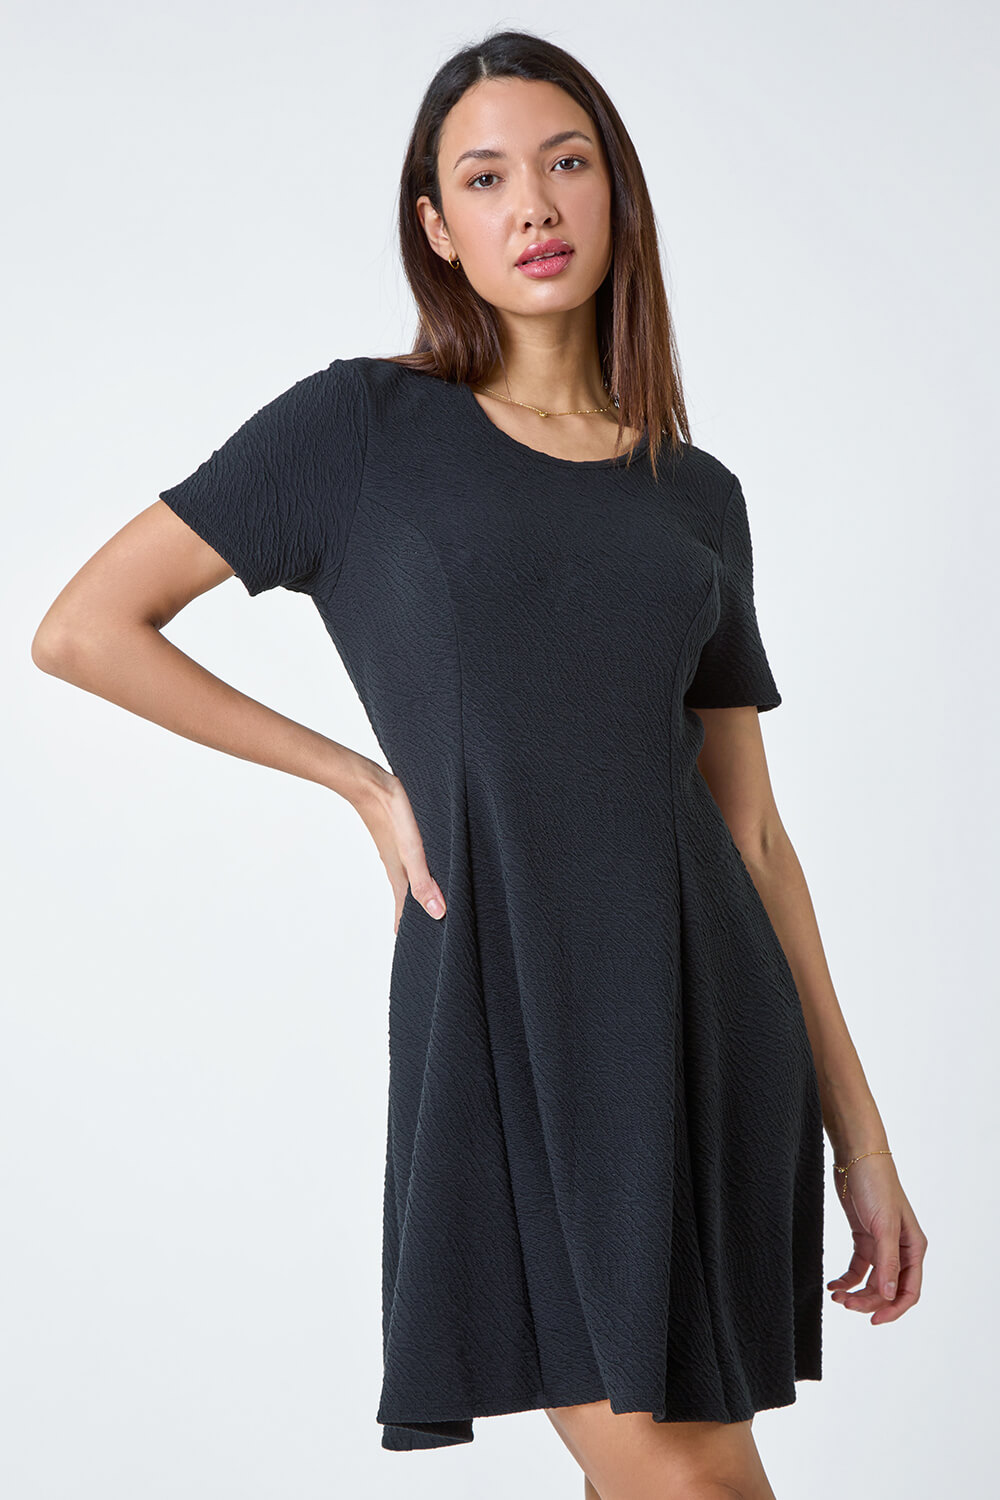 Black Luxe Stretch Pannelled Dress, Image 2 of 5